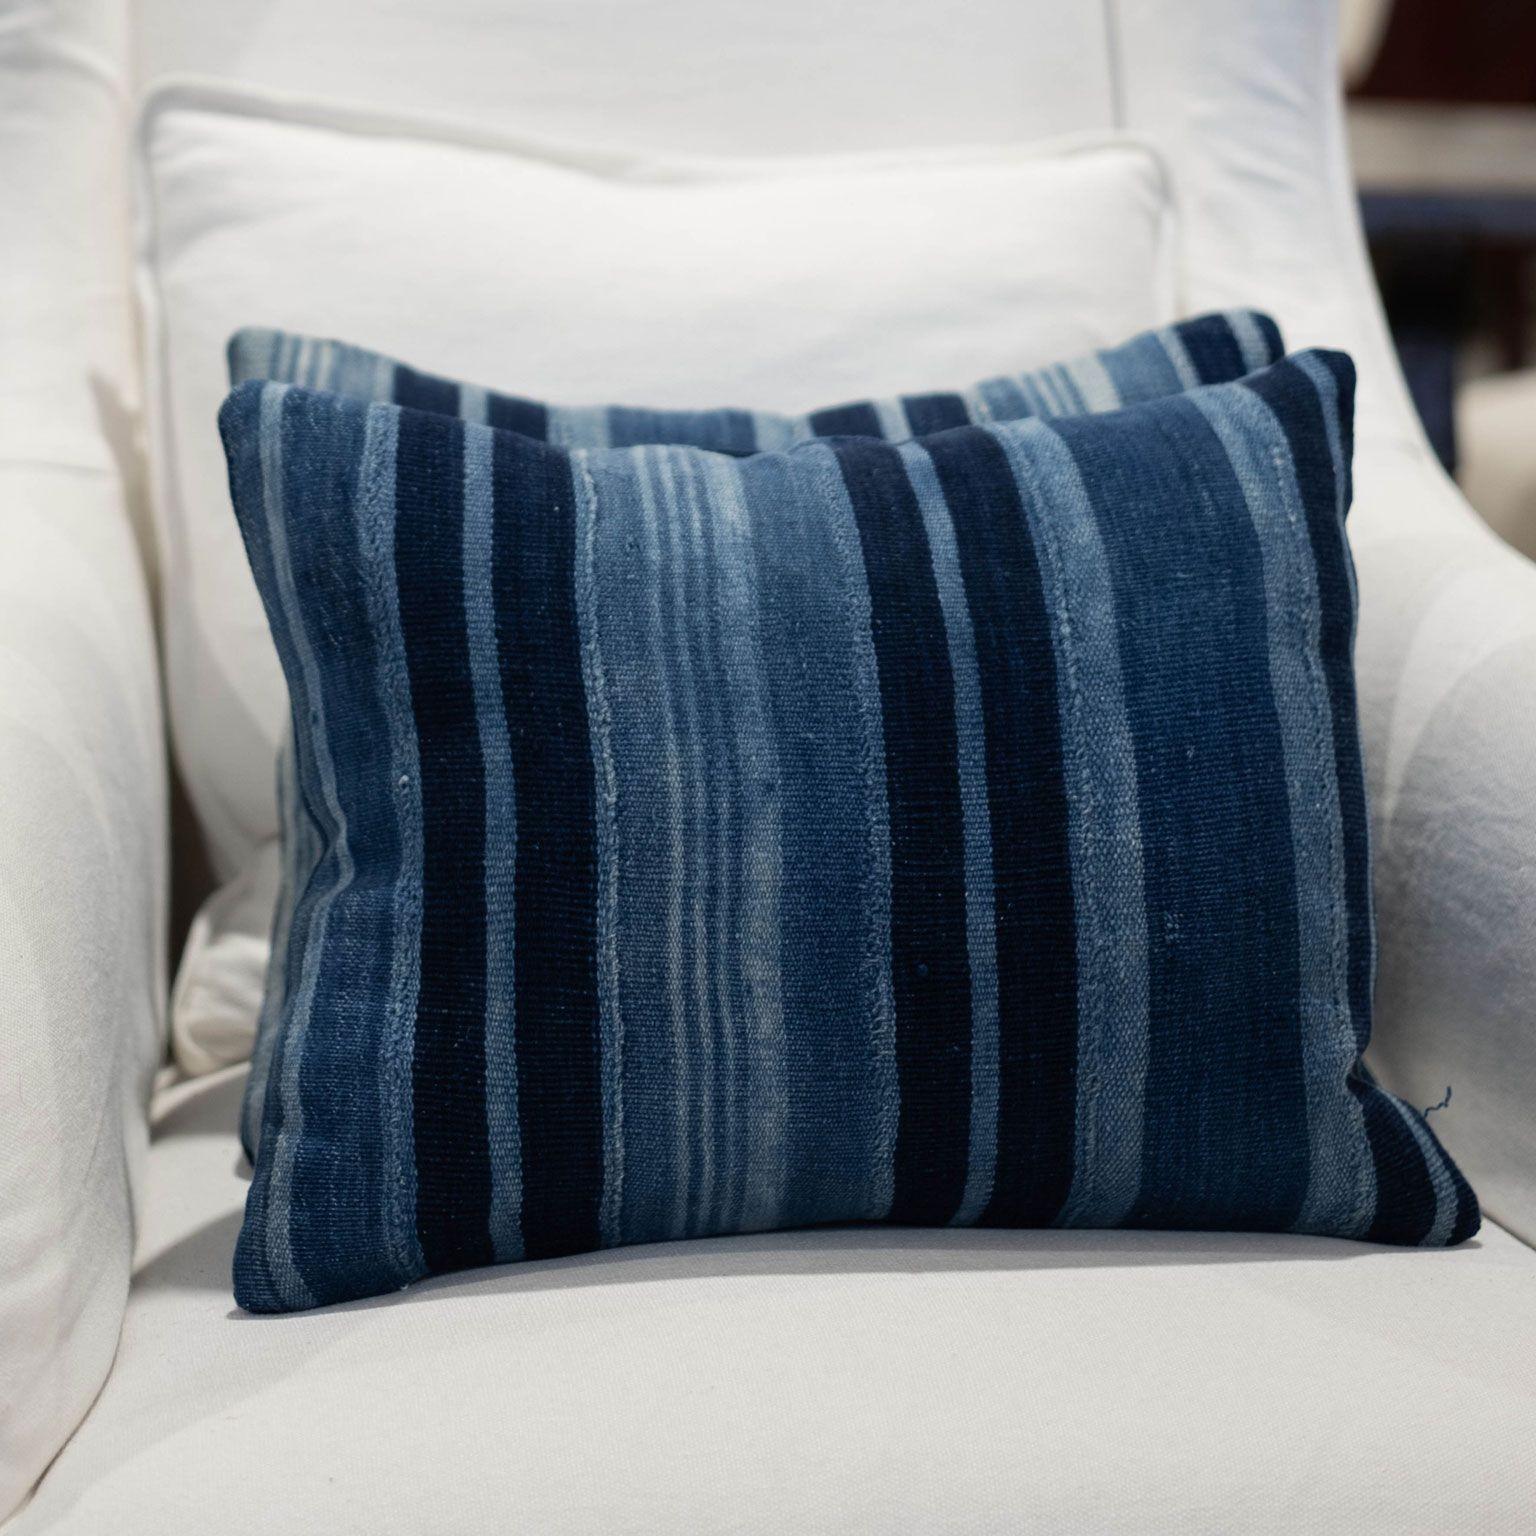 Rich Faded Indigo Stripe Cushion In Good Condition For Sale In Houston, TX